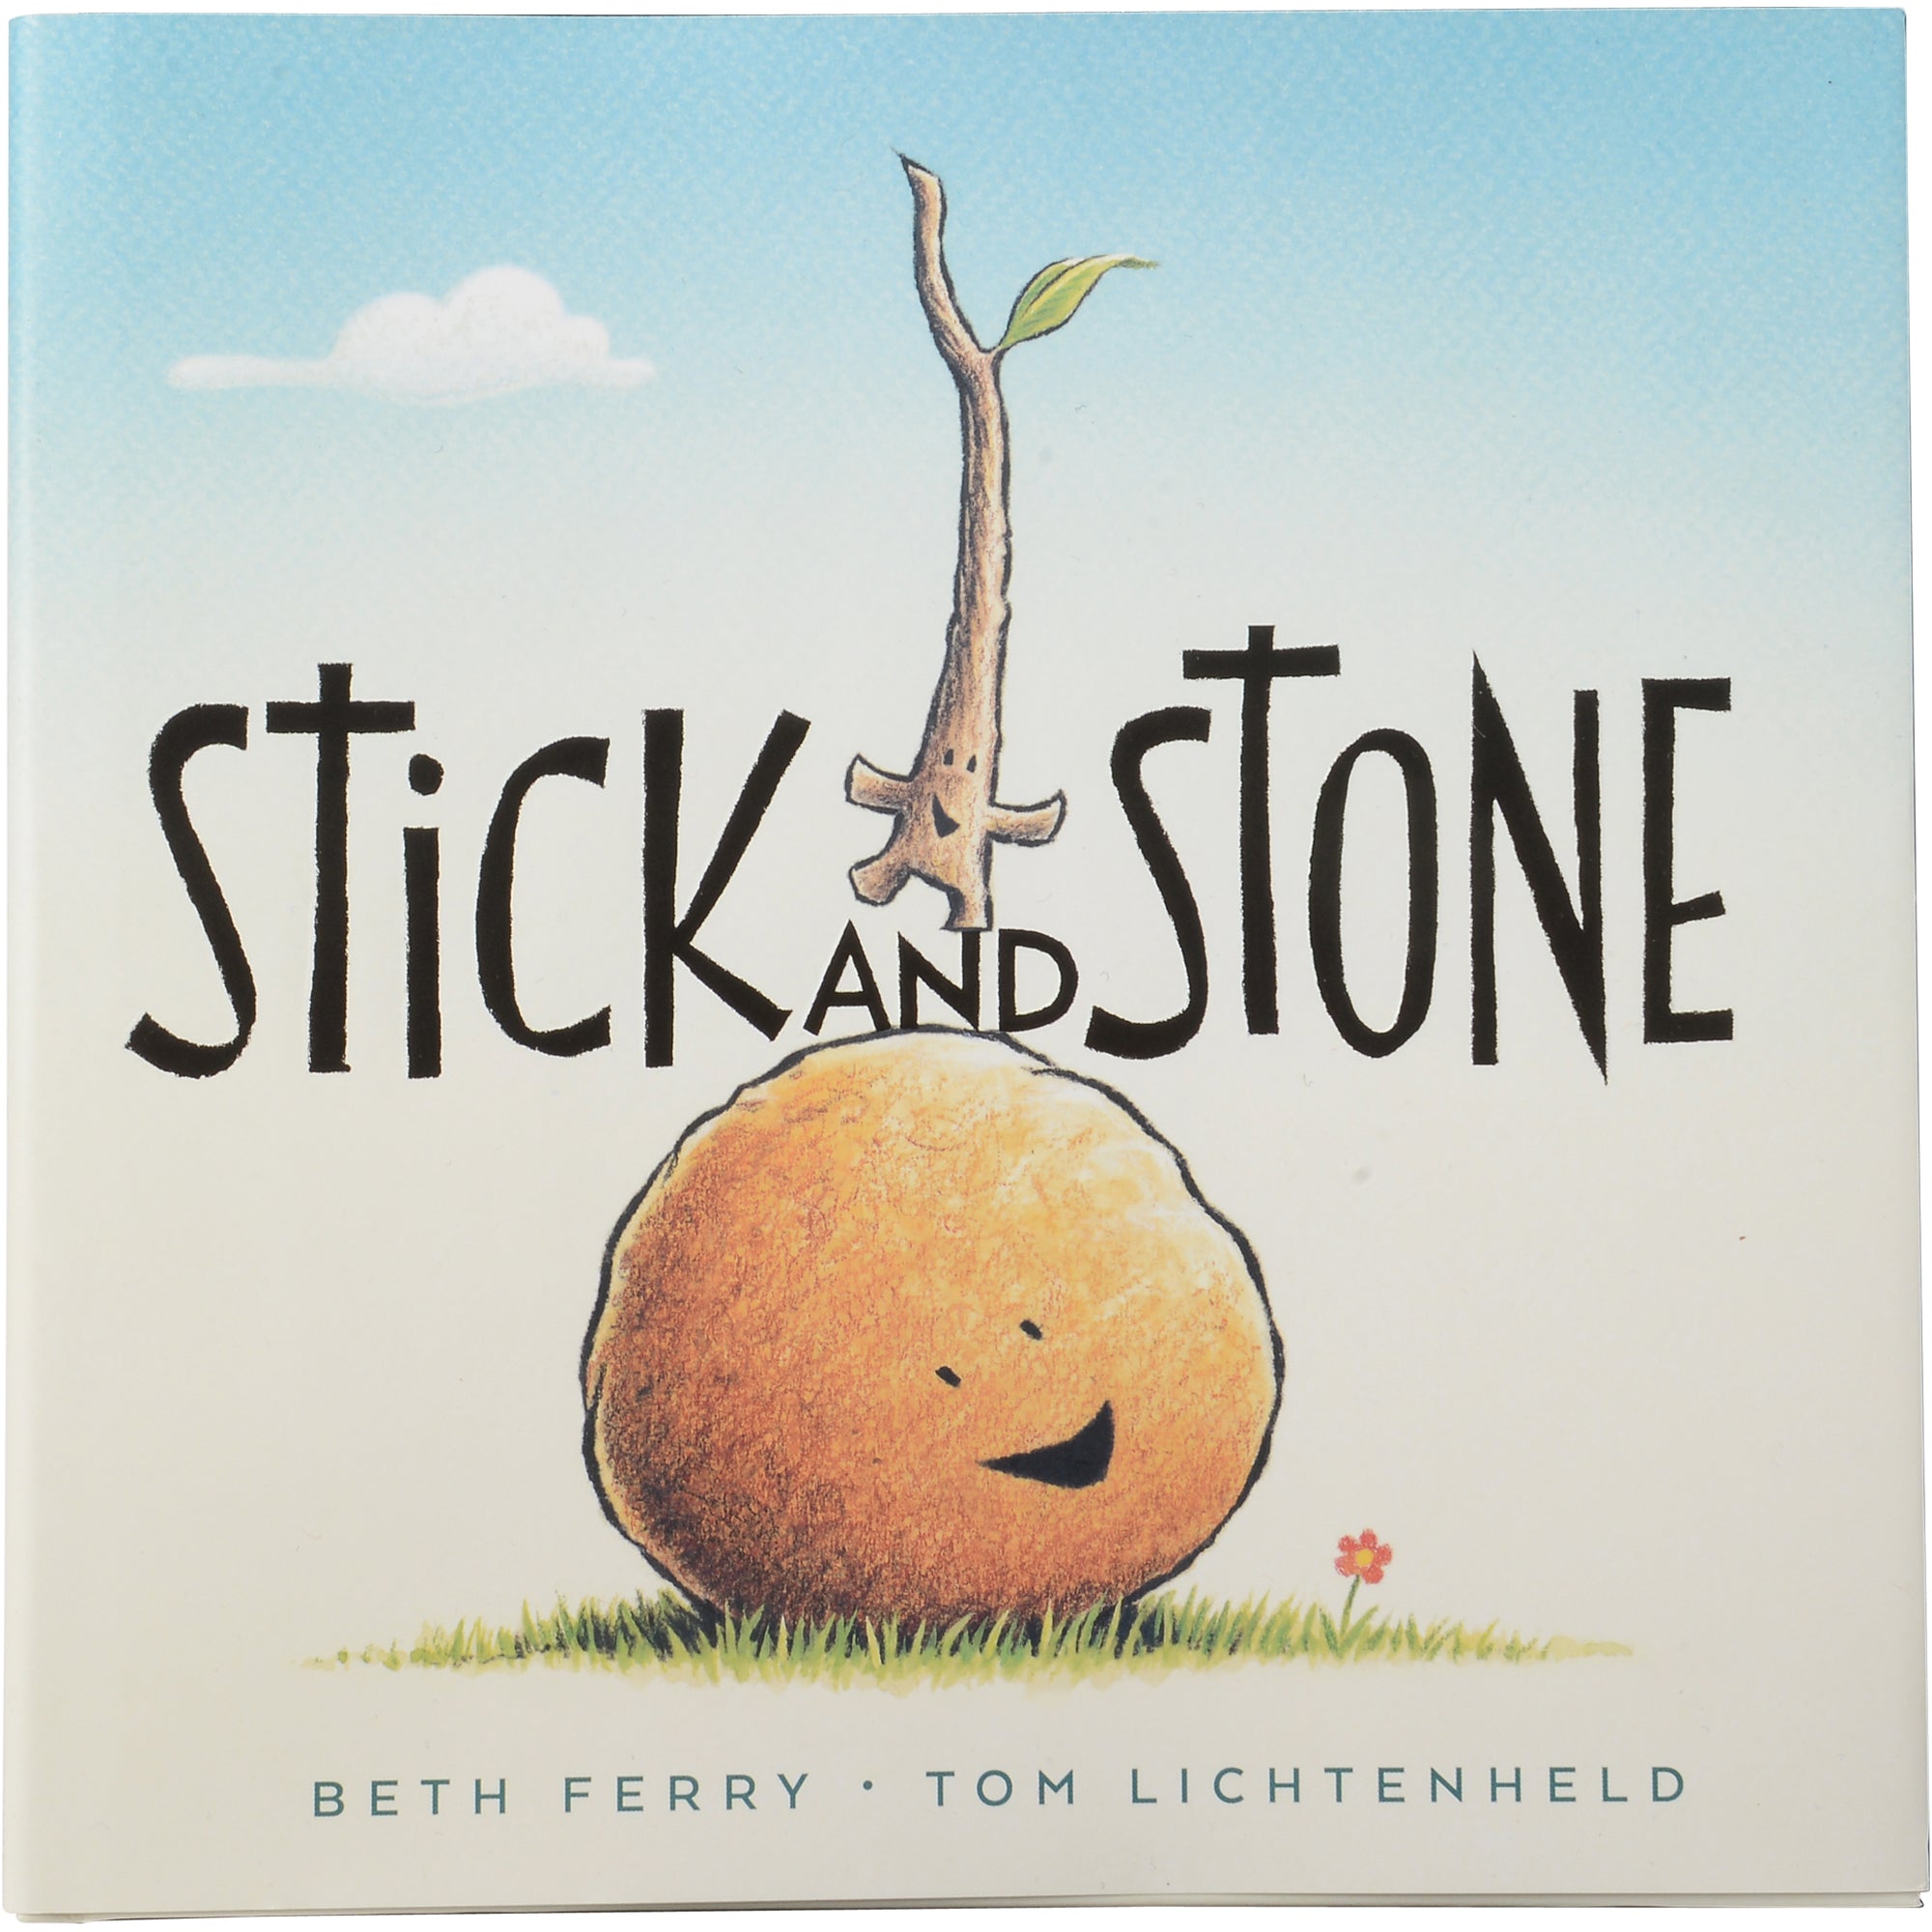 "Stick and Stone" - A Story of Friendship